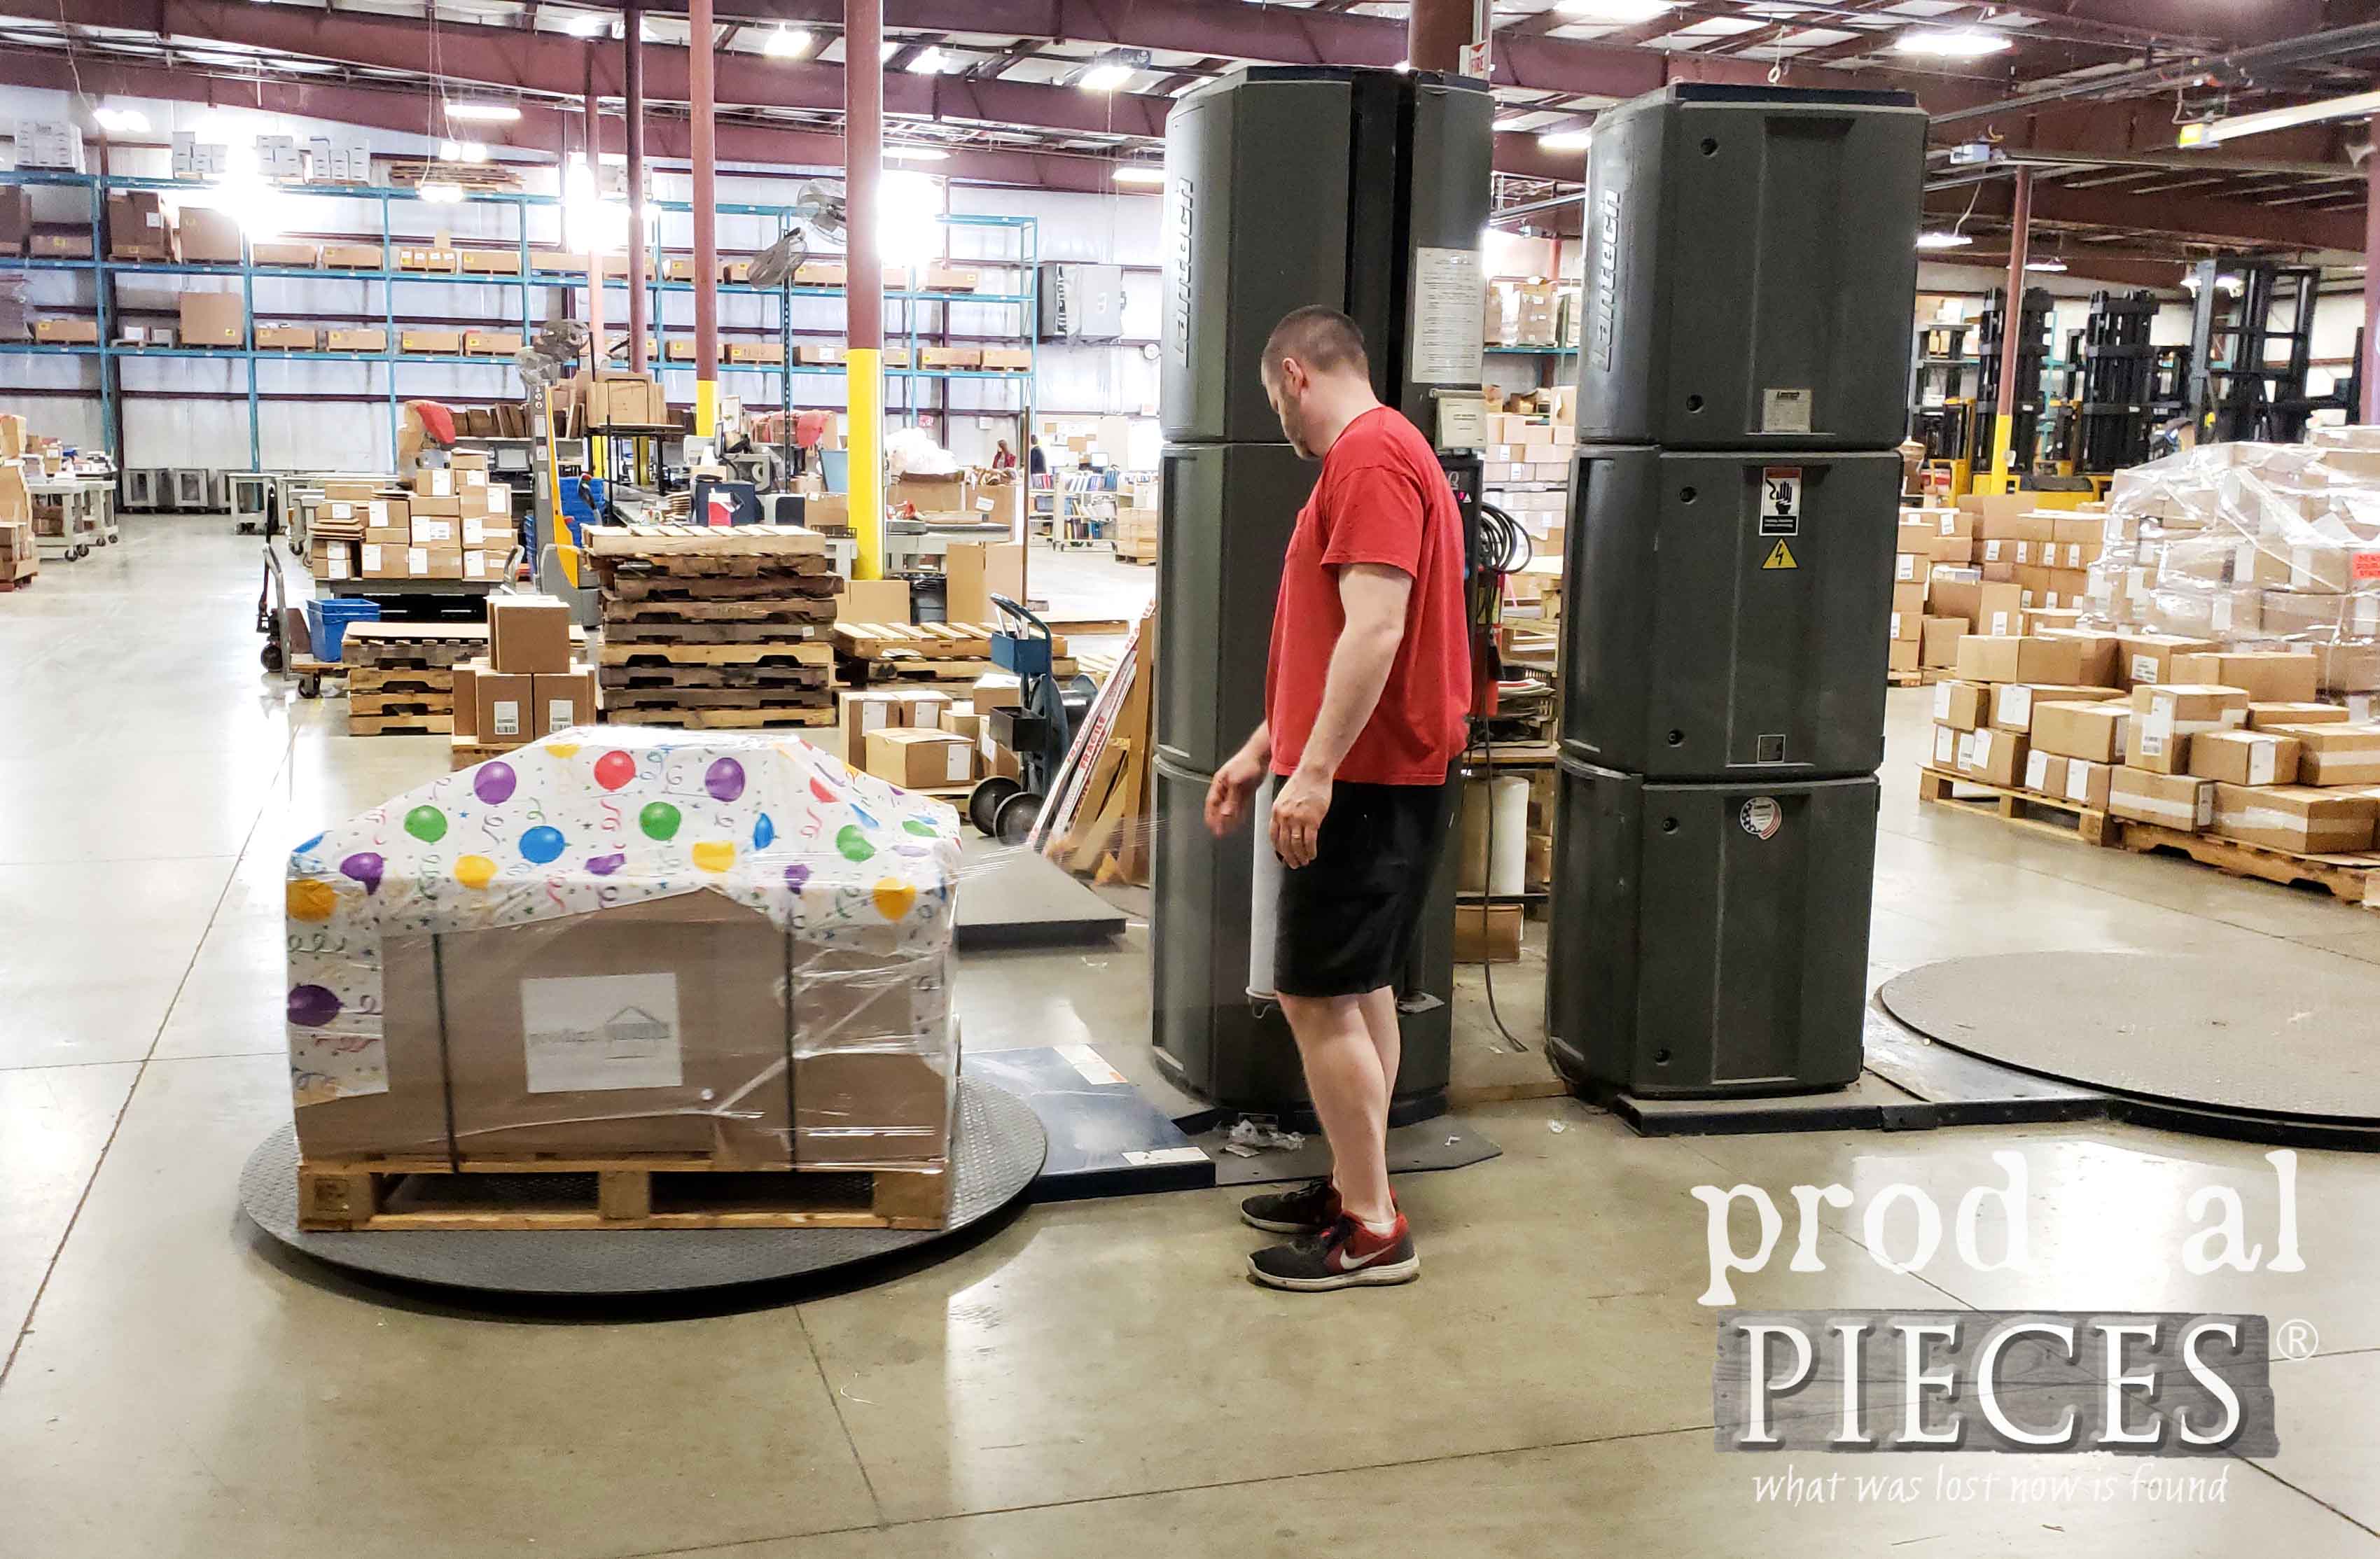 Wrapping Pallet of Furniture to Ship to Finding Home Honoree by Prodigal Pieces | prodigalpieces.com